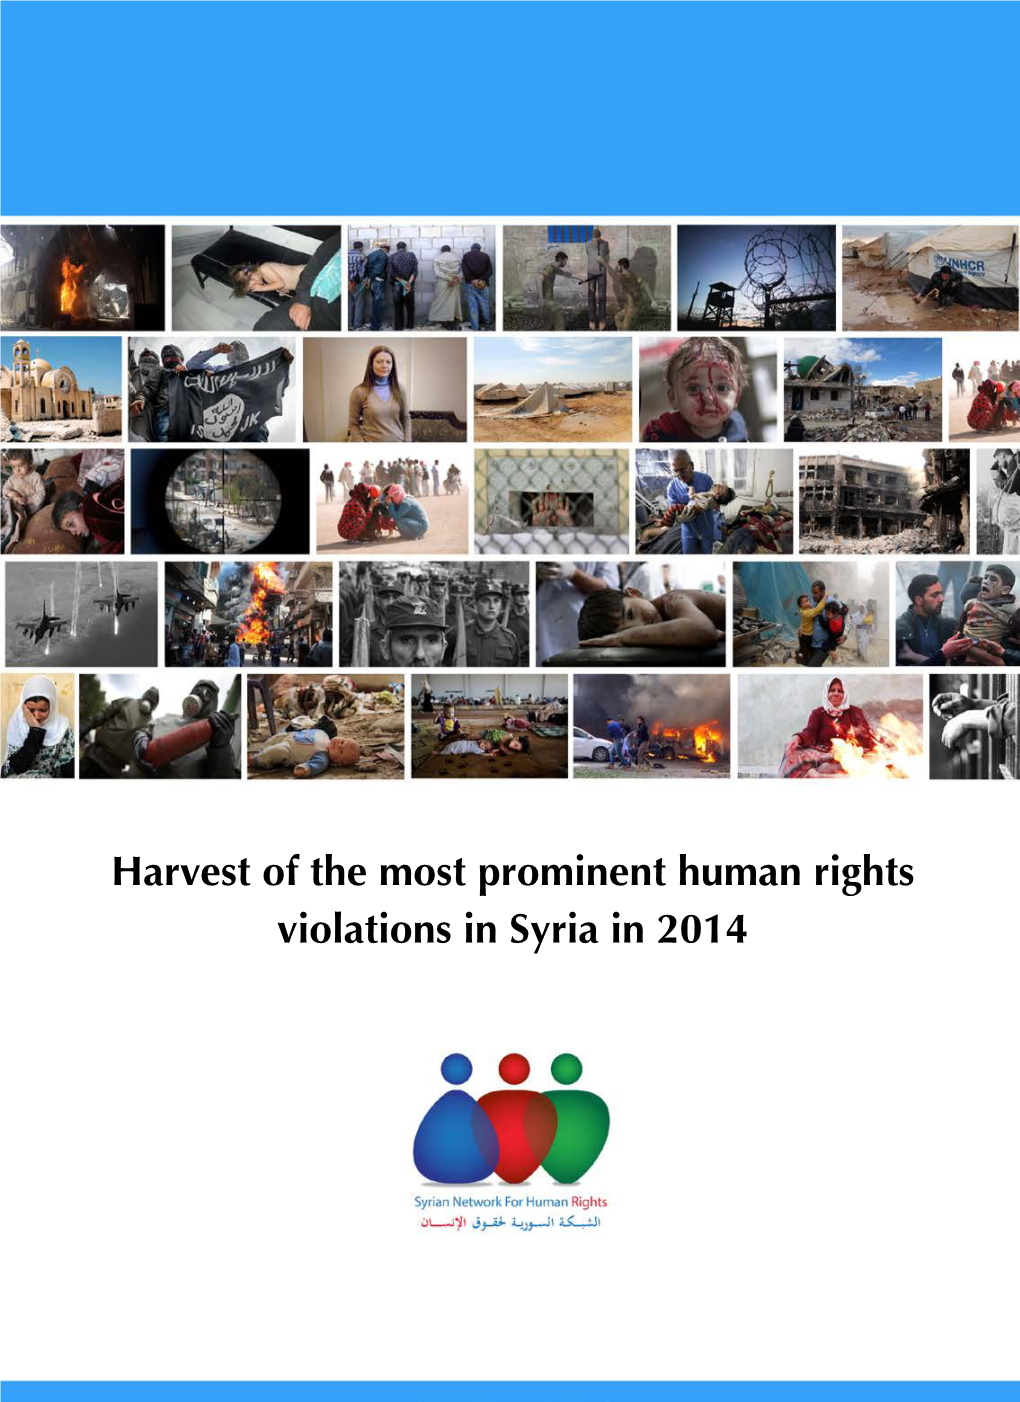 Harvest of the Most Prominent Human Rights Violations in Syria in 2014